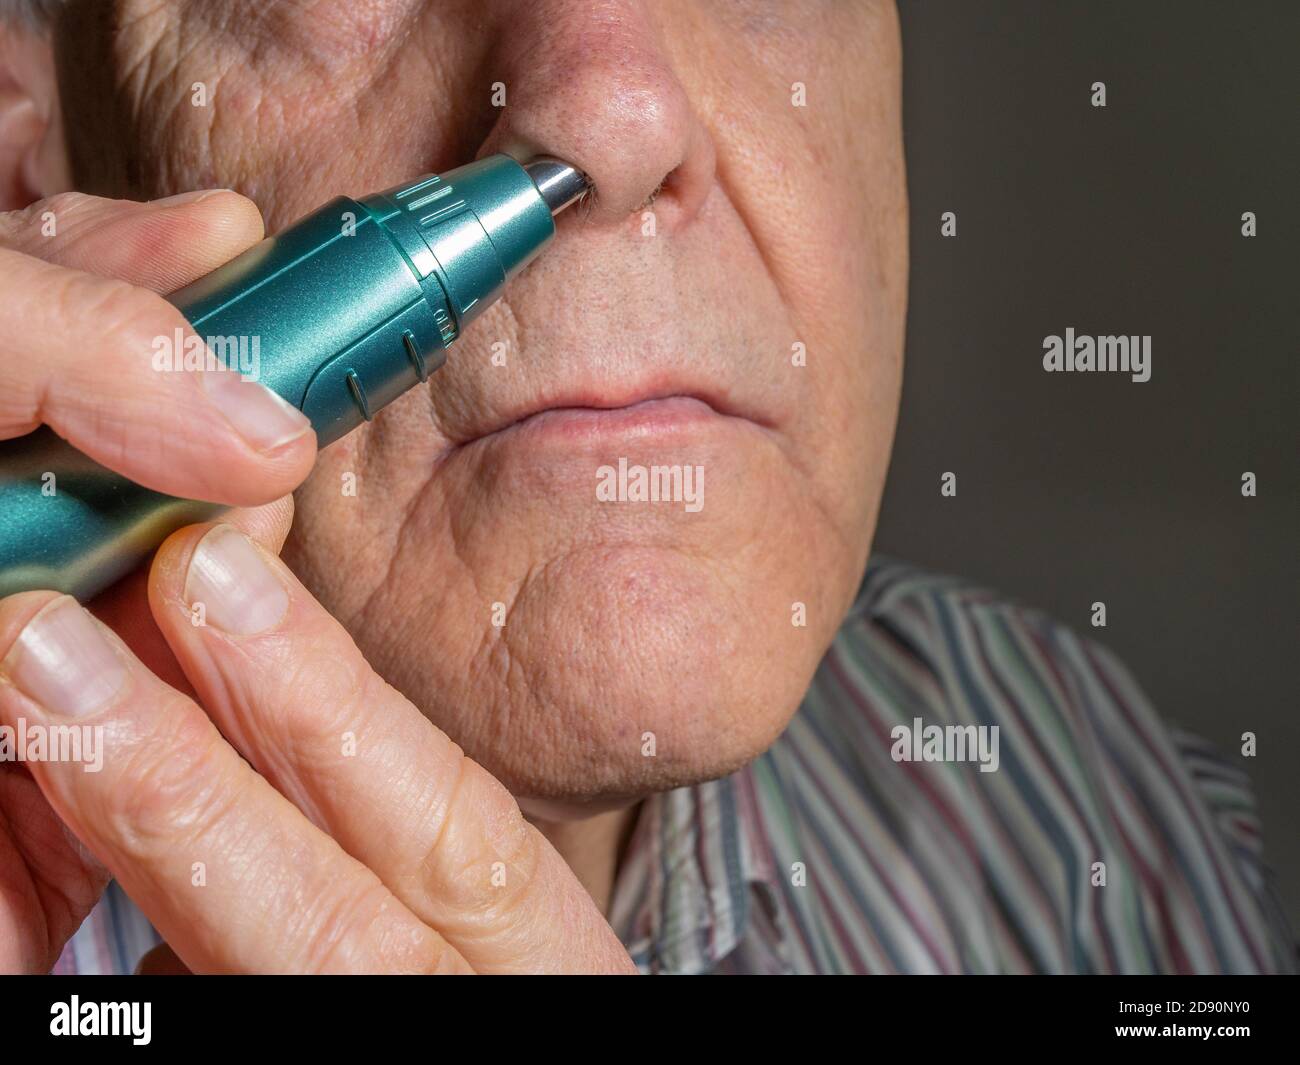 Closeup POV shot of an older man using a small, battery powered hand held trimmer to remove excess hair from a nostril. Stock Photo